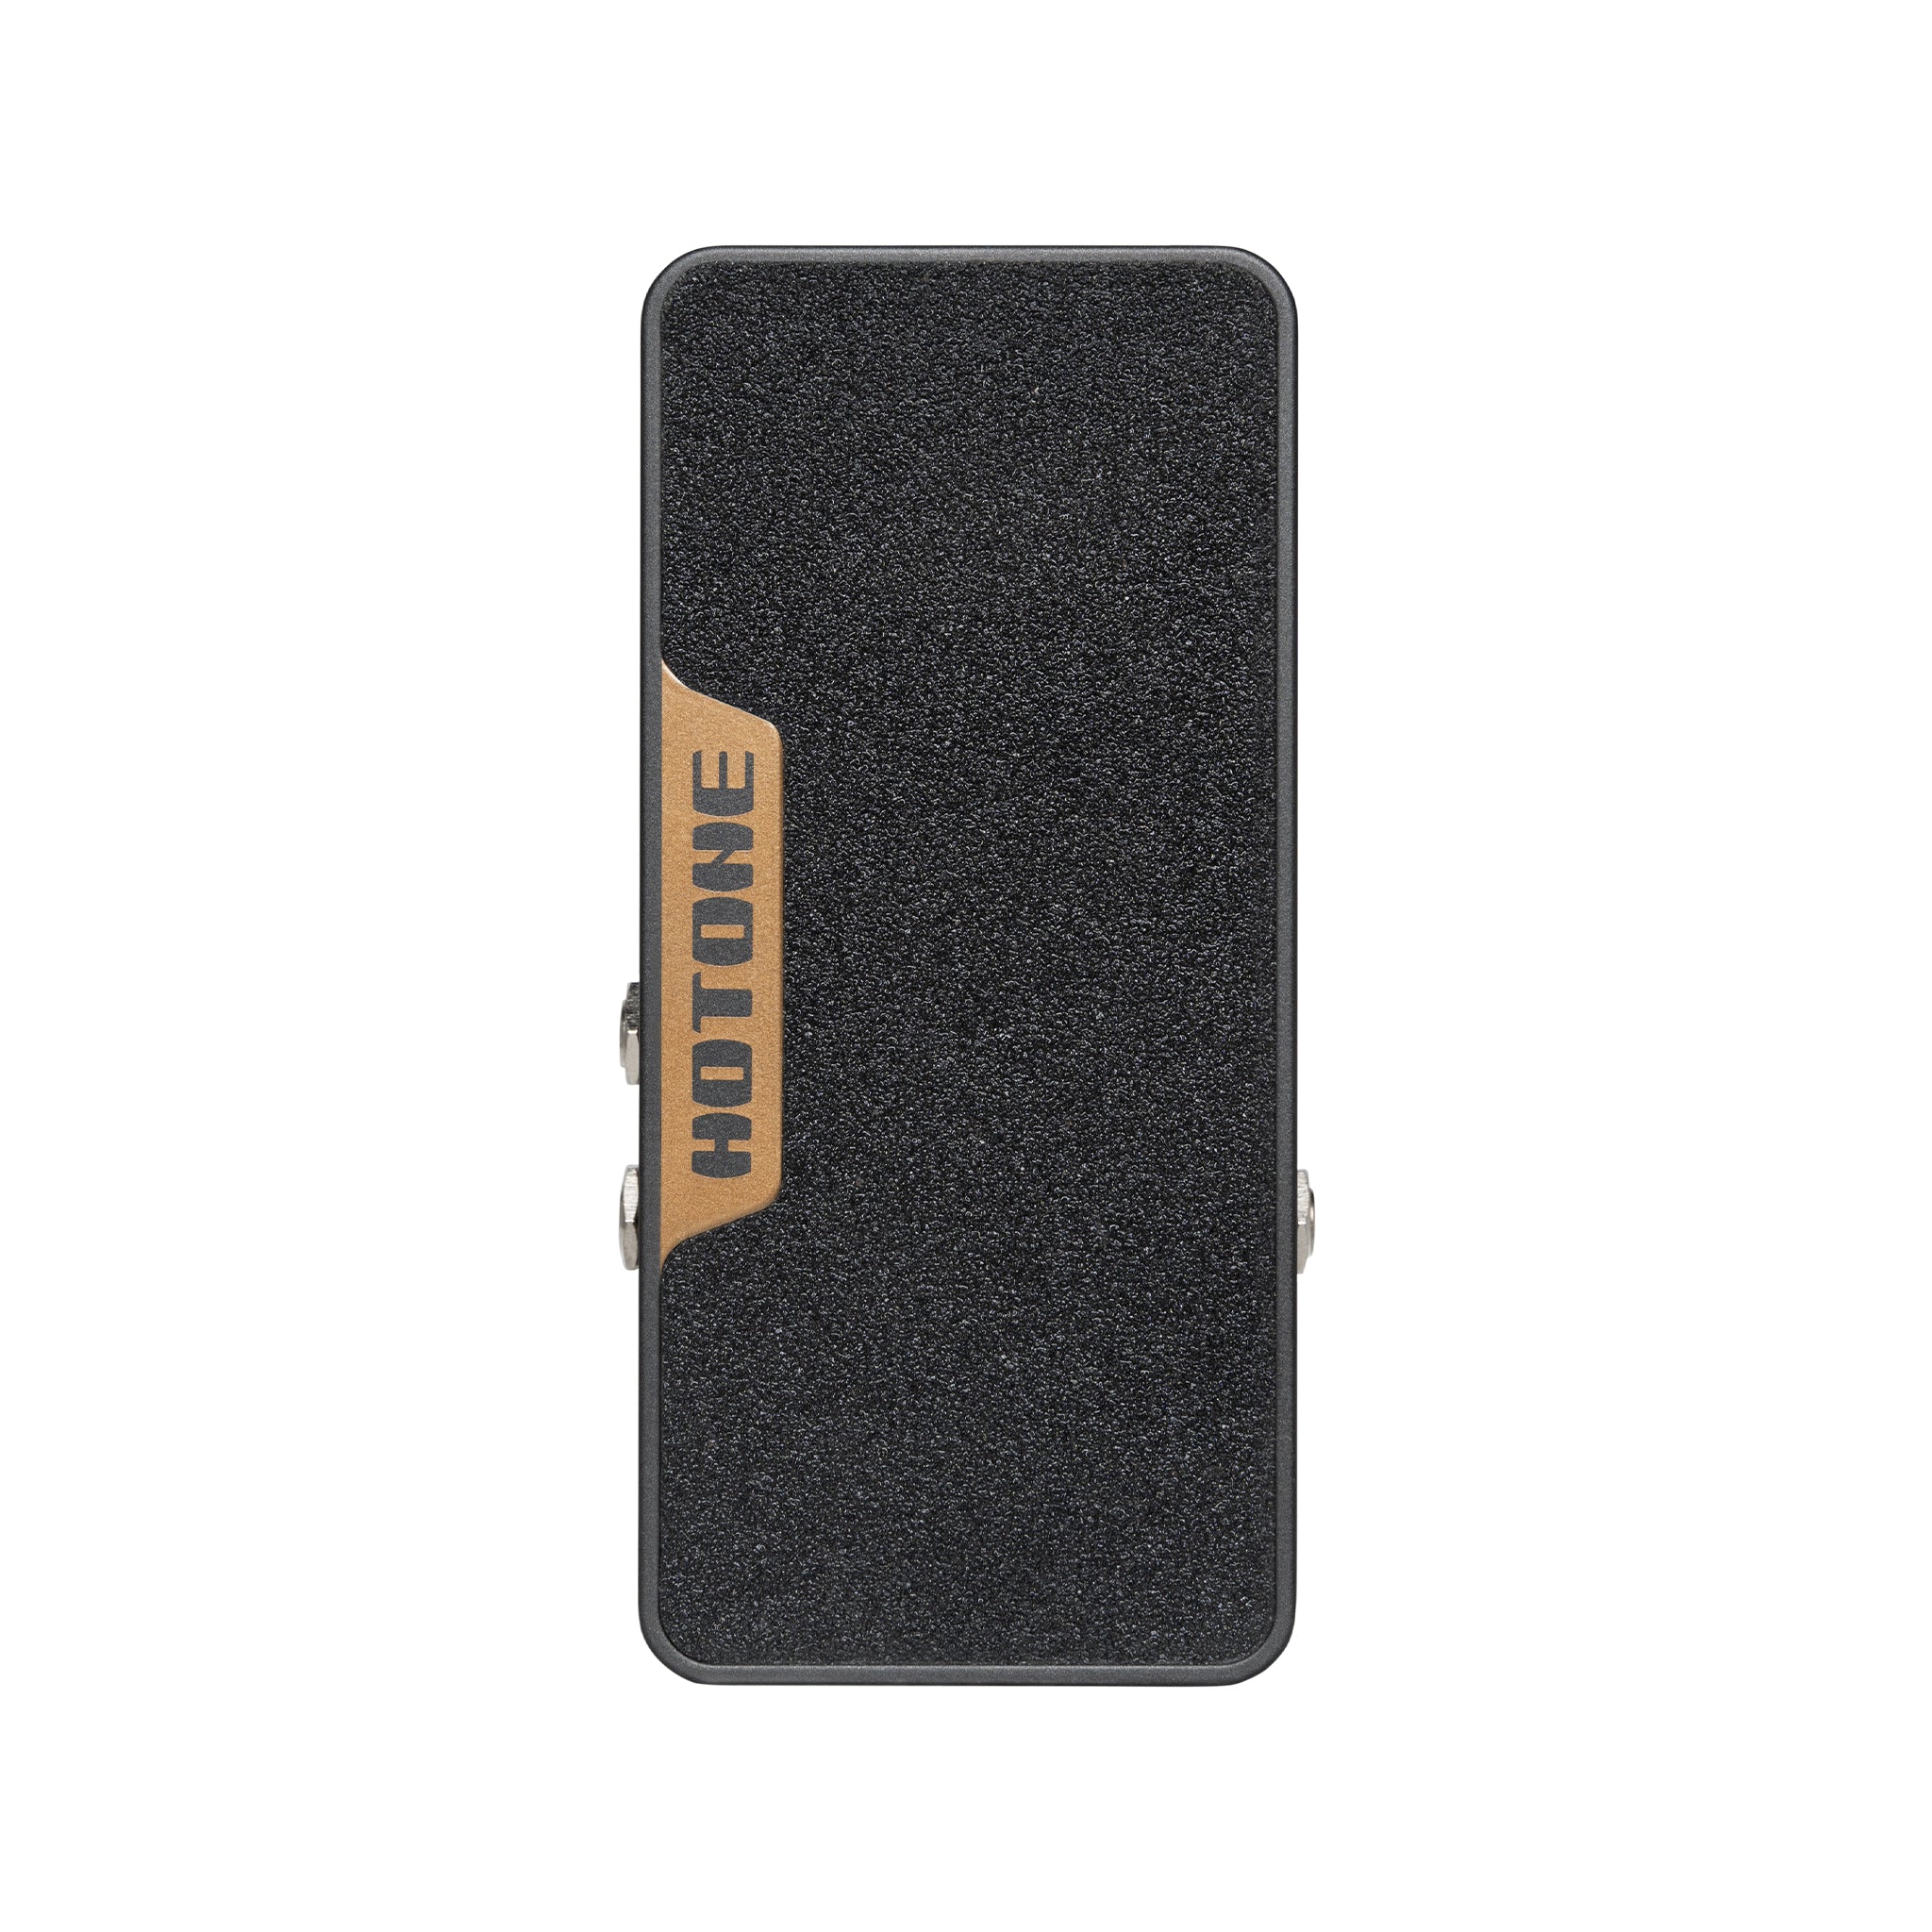 Hotone Ampero Press Volume / Expression / Wah Guitar Effects Pedal